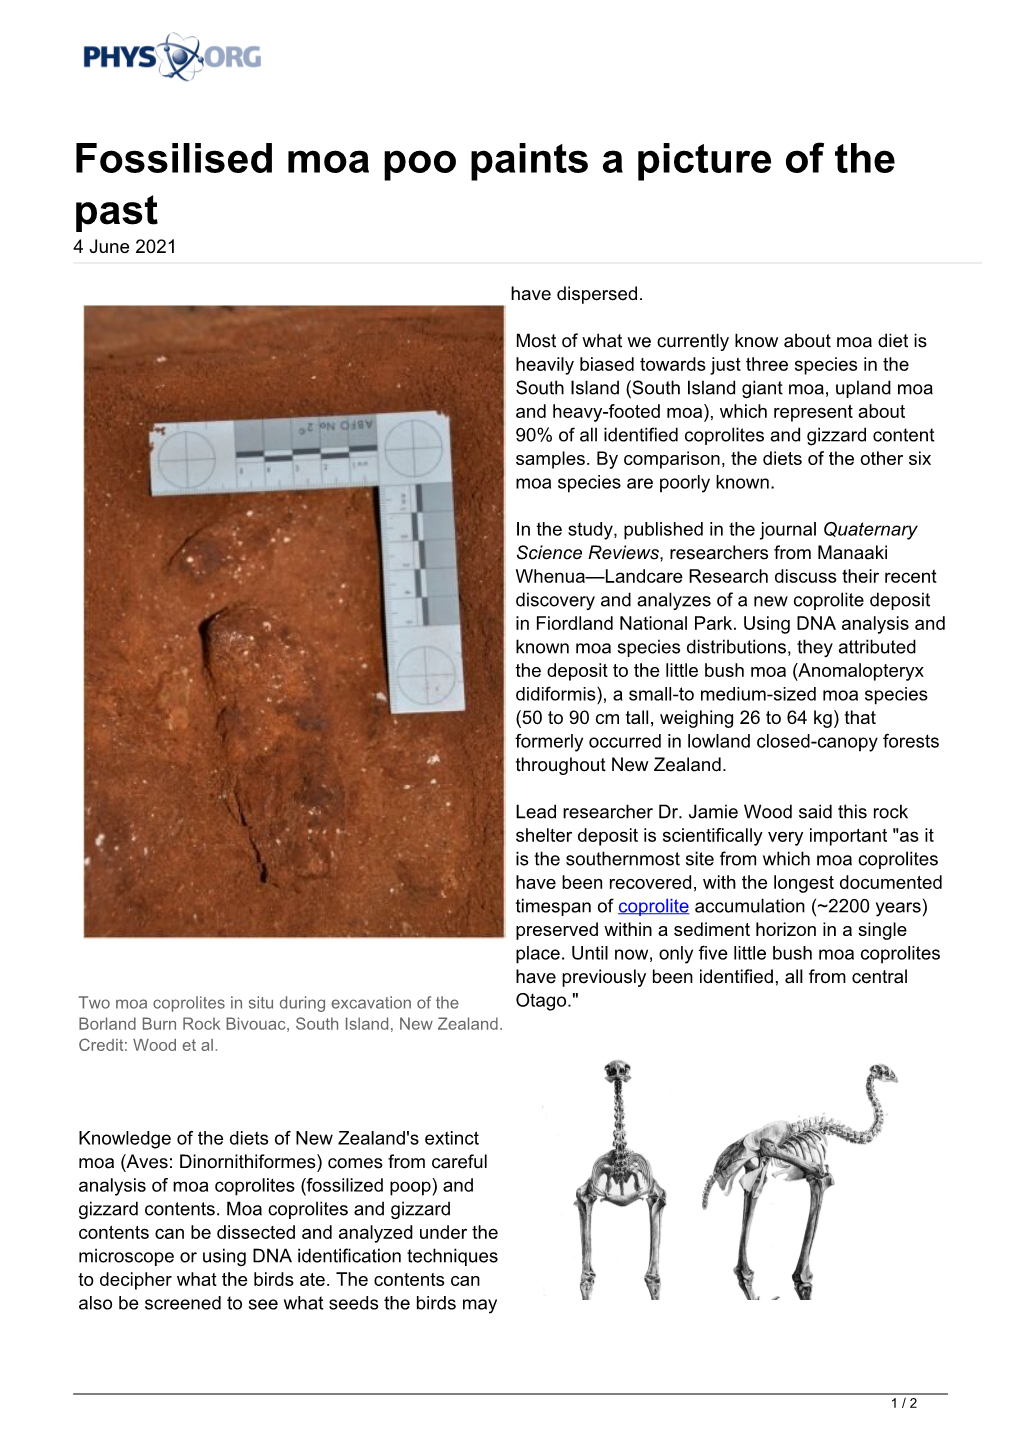 Fossilised Moa Poo Paints a Picture of the Past 4 June 2021